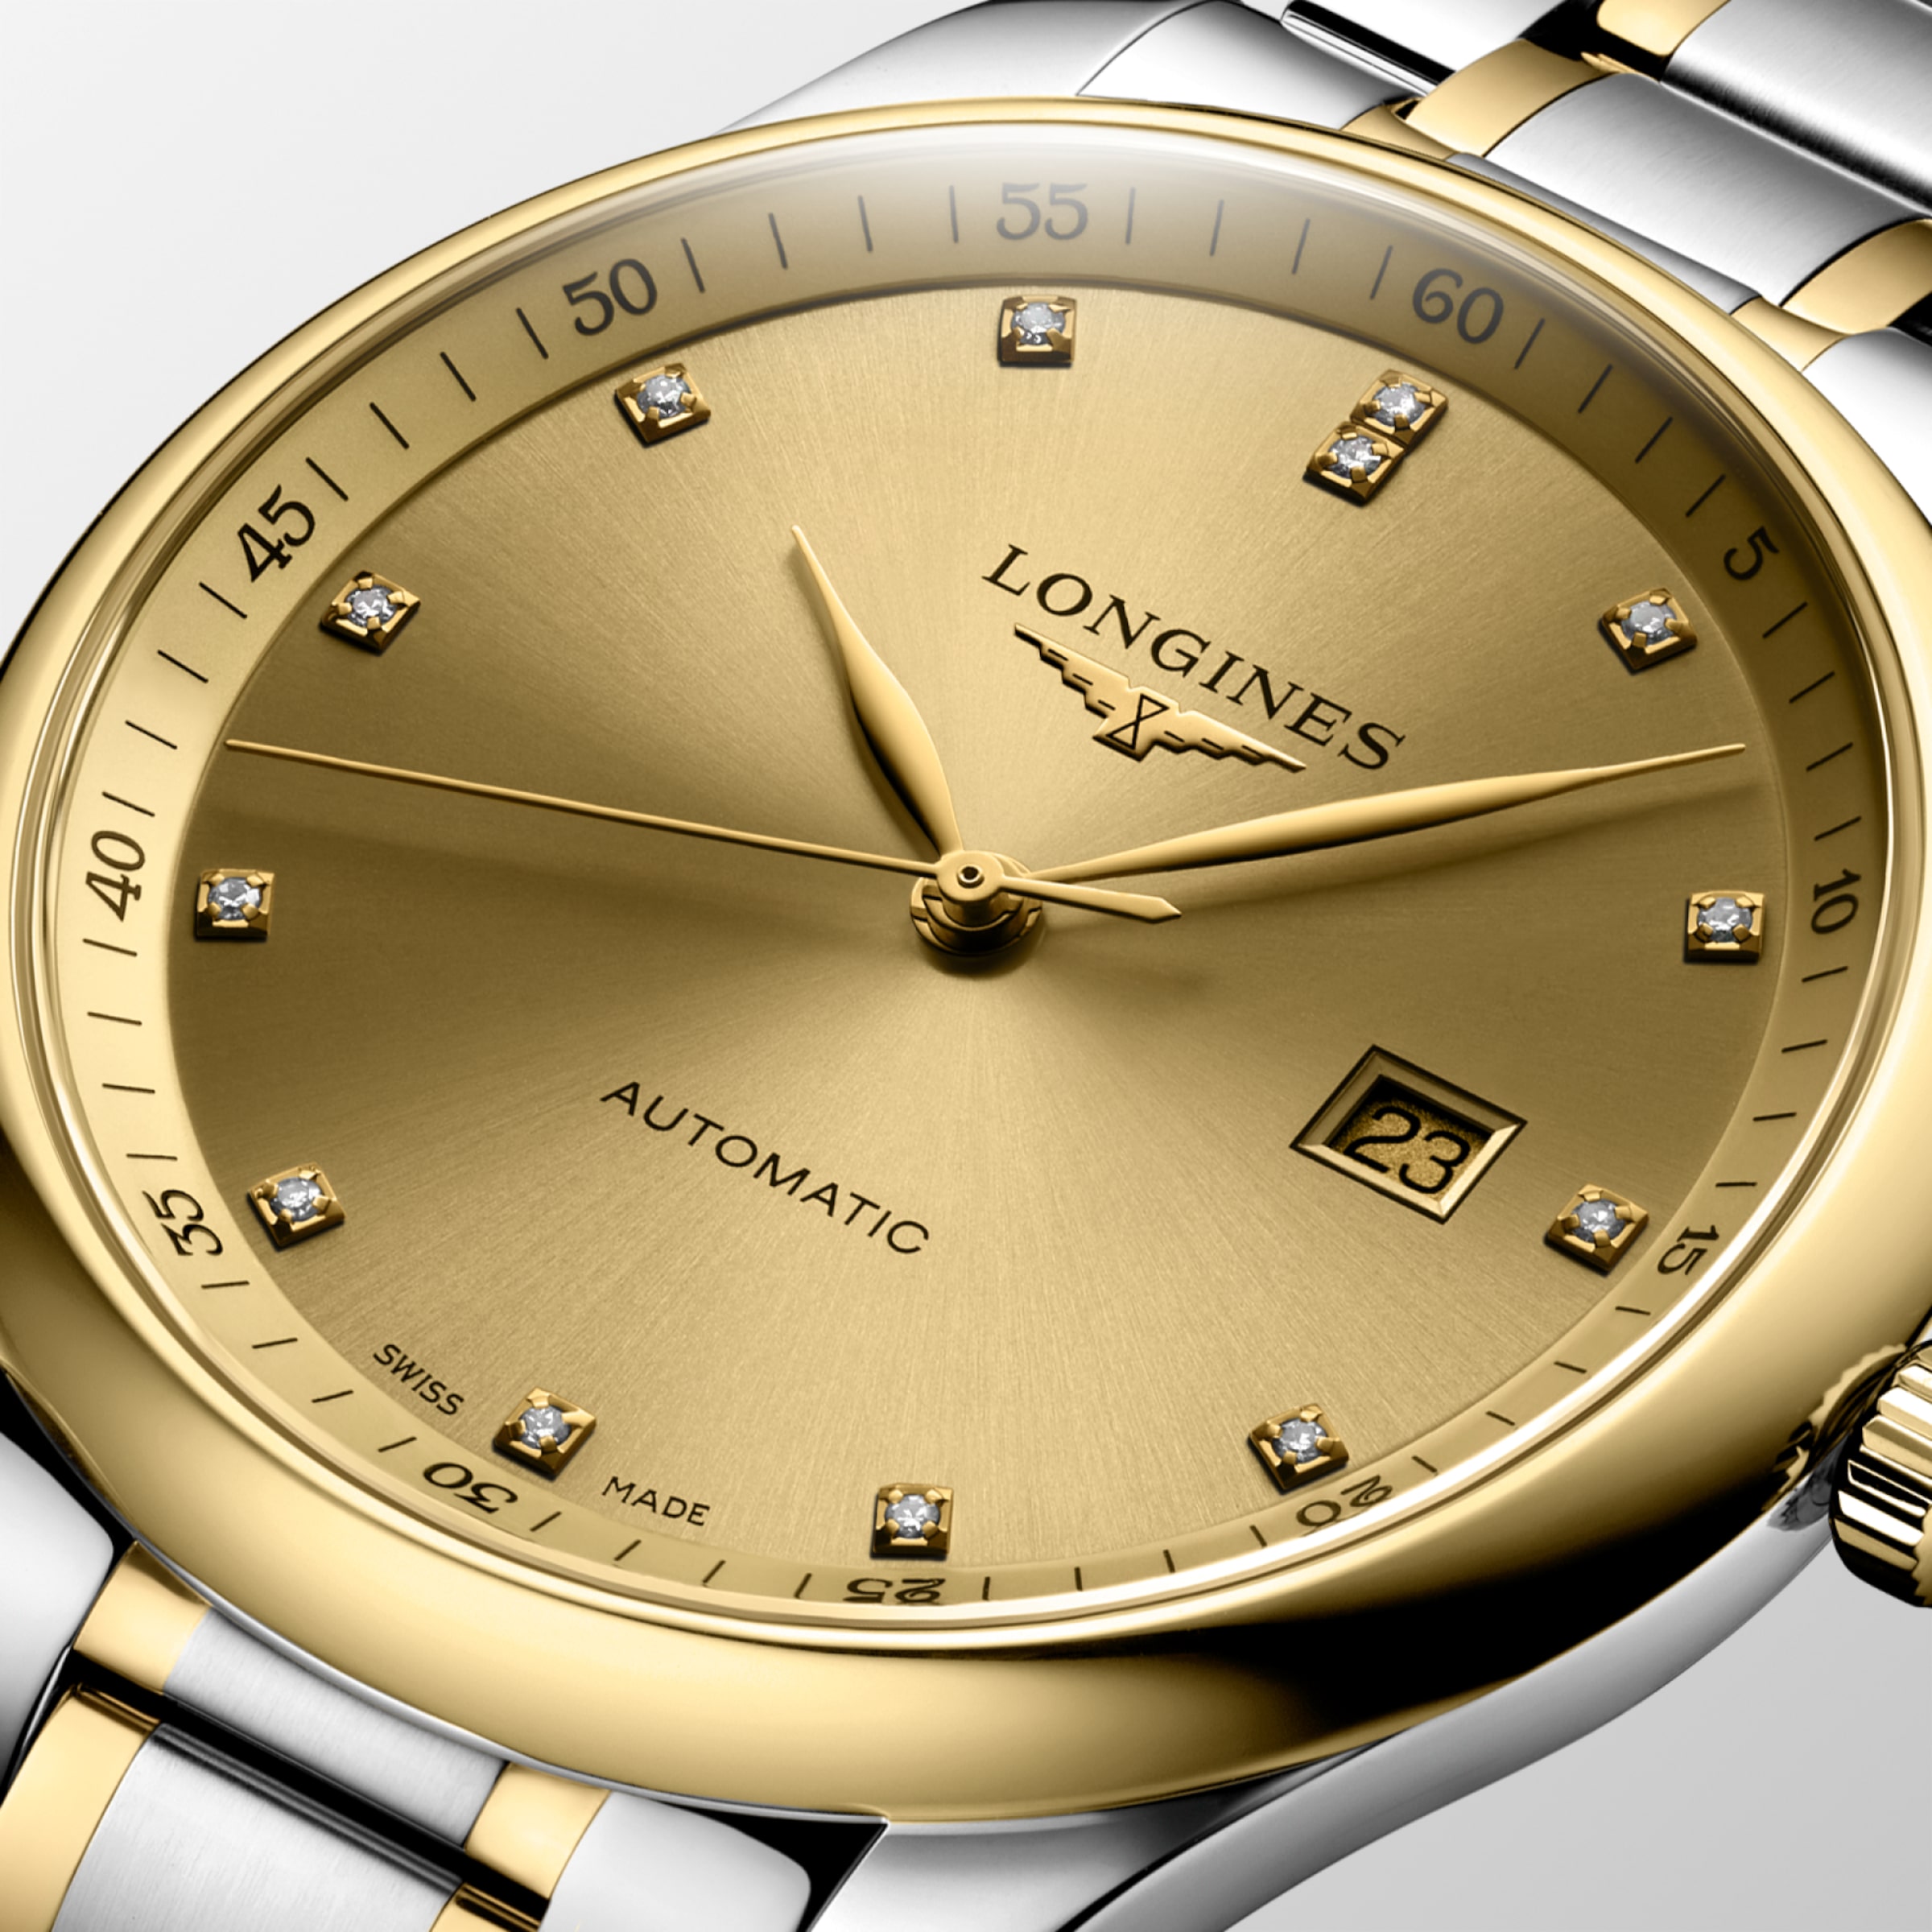 Longines MASTER COLLECTION Automatic Stainless steel and 18 karat yellow gold cap 200 Watch - L2.893.5.37.7